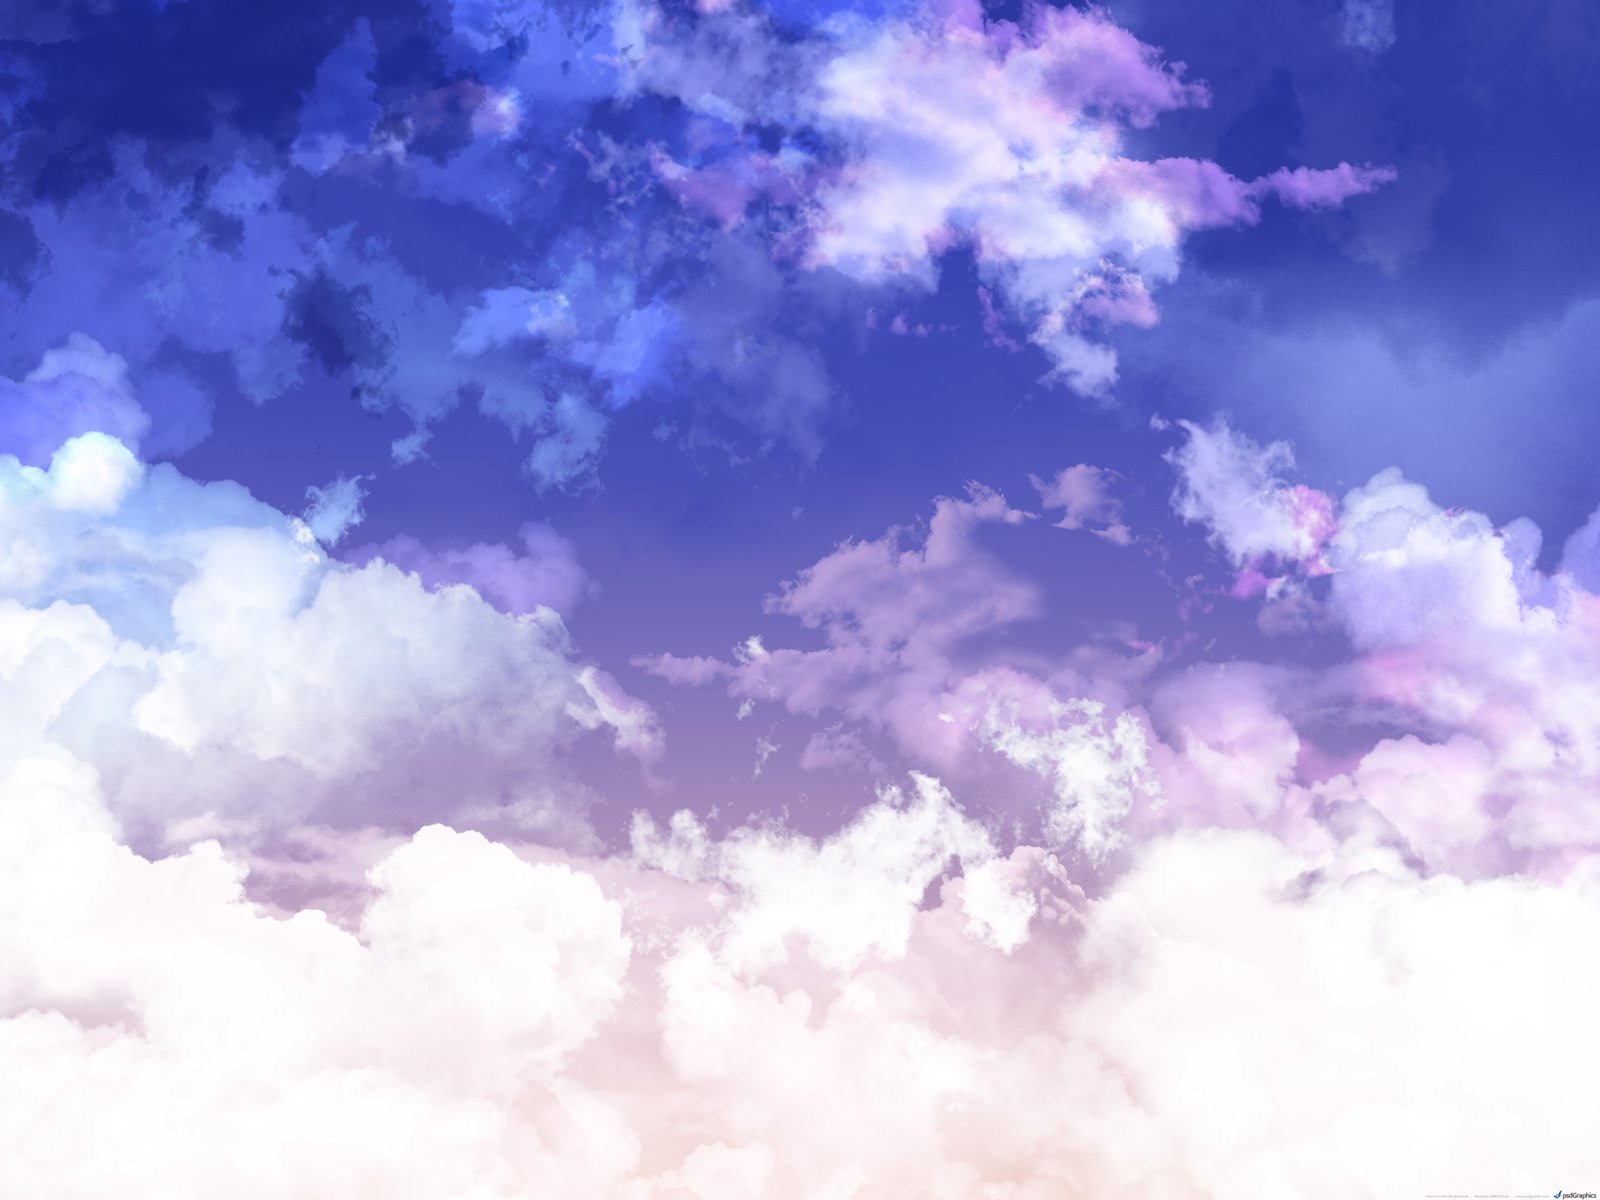 Two Magical Purple Sky Backgrounds Psdgraphics